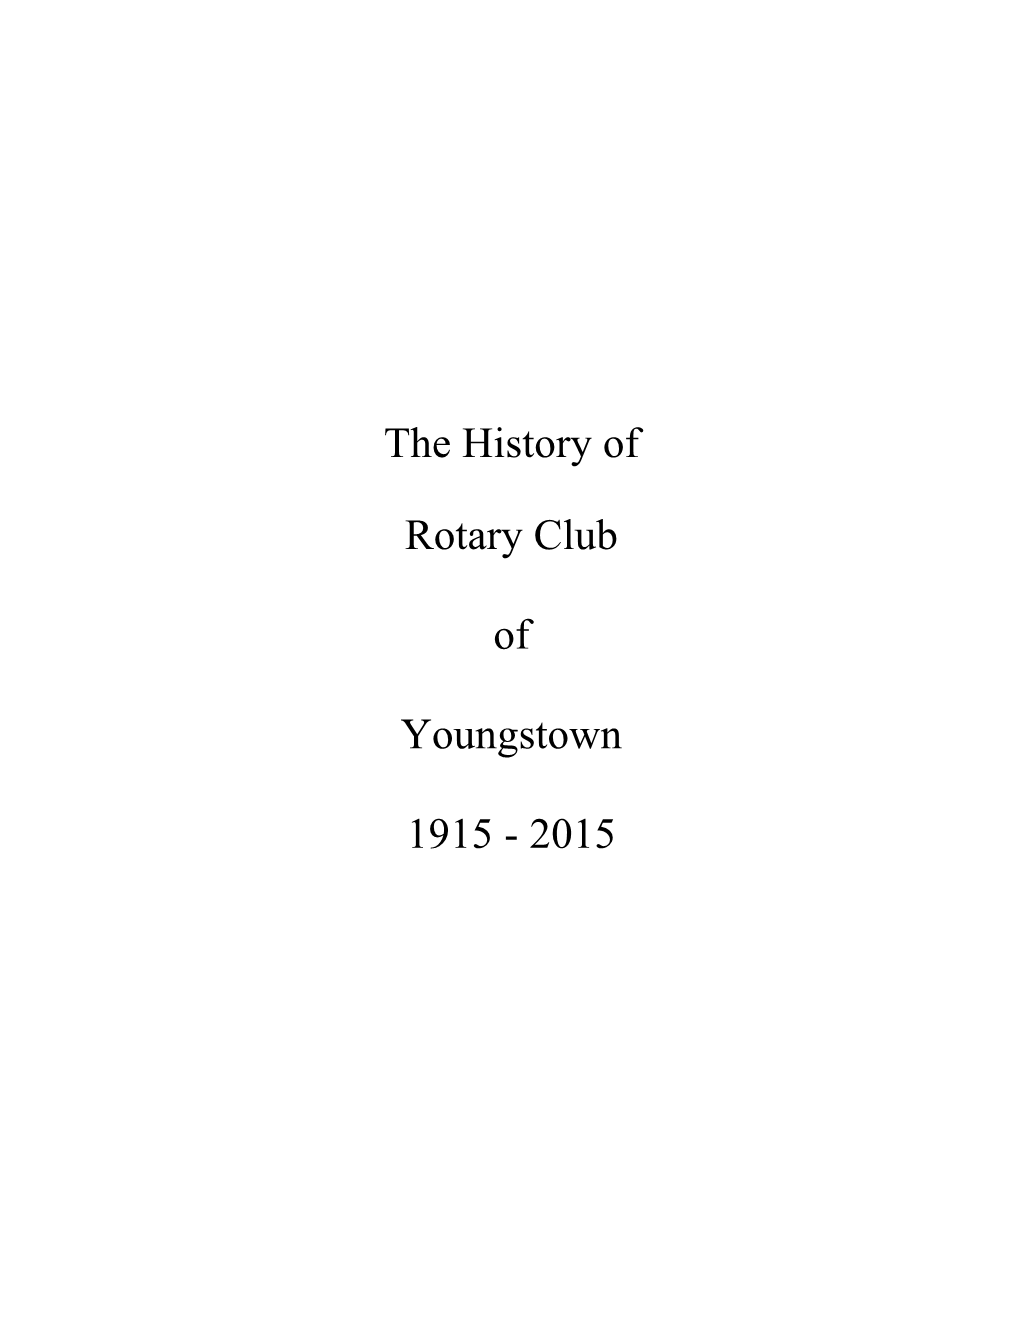 The History of Rotary Club of Youngstown 1915